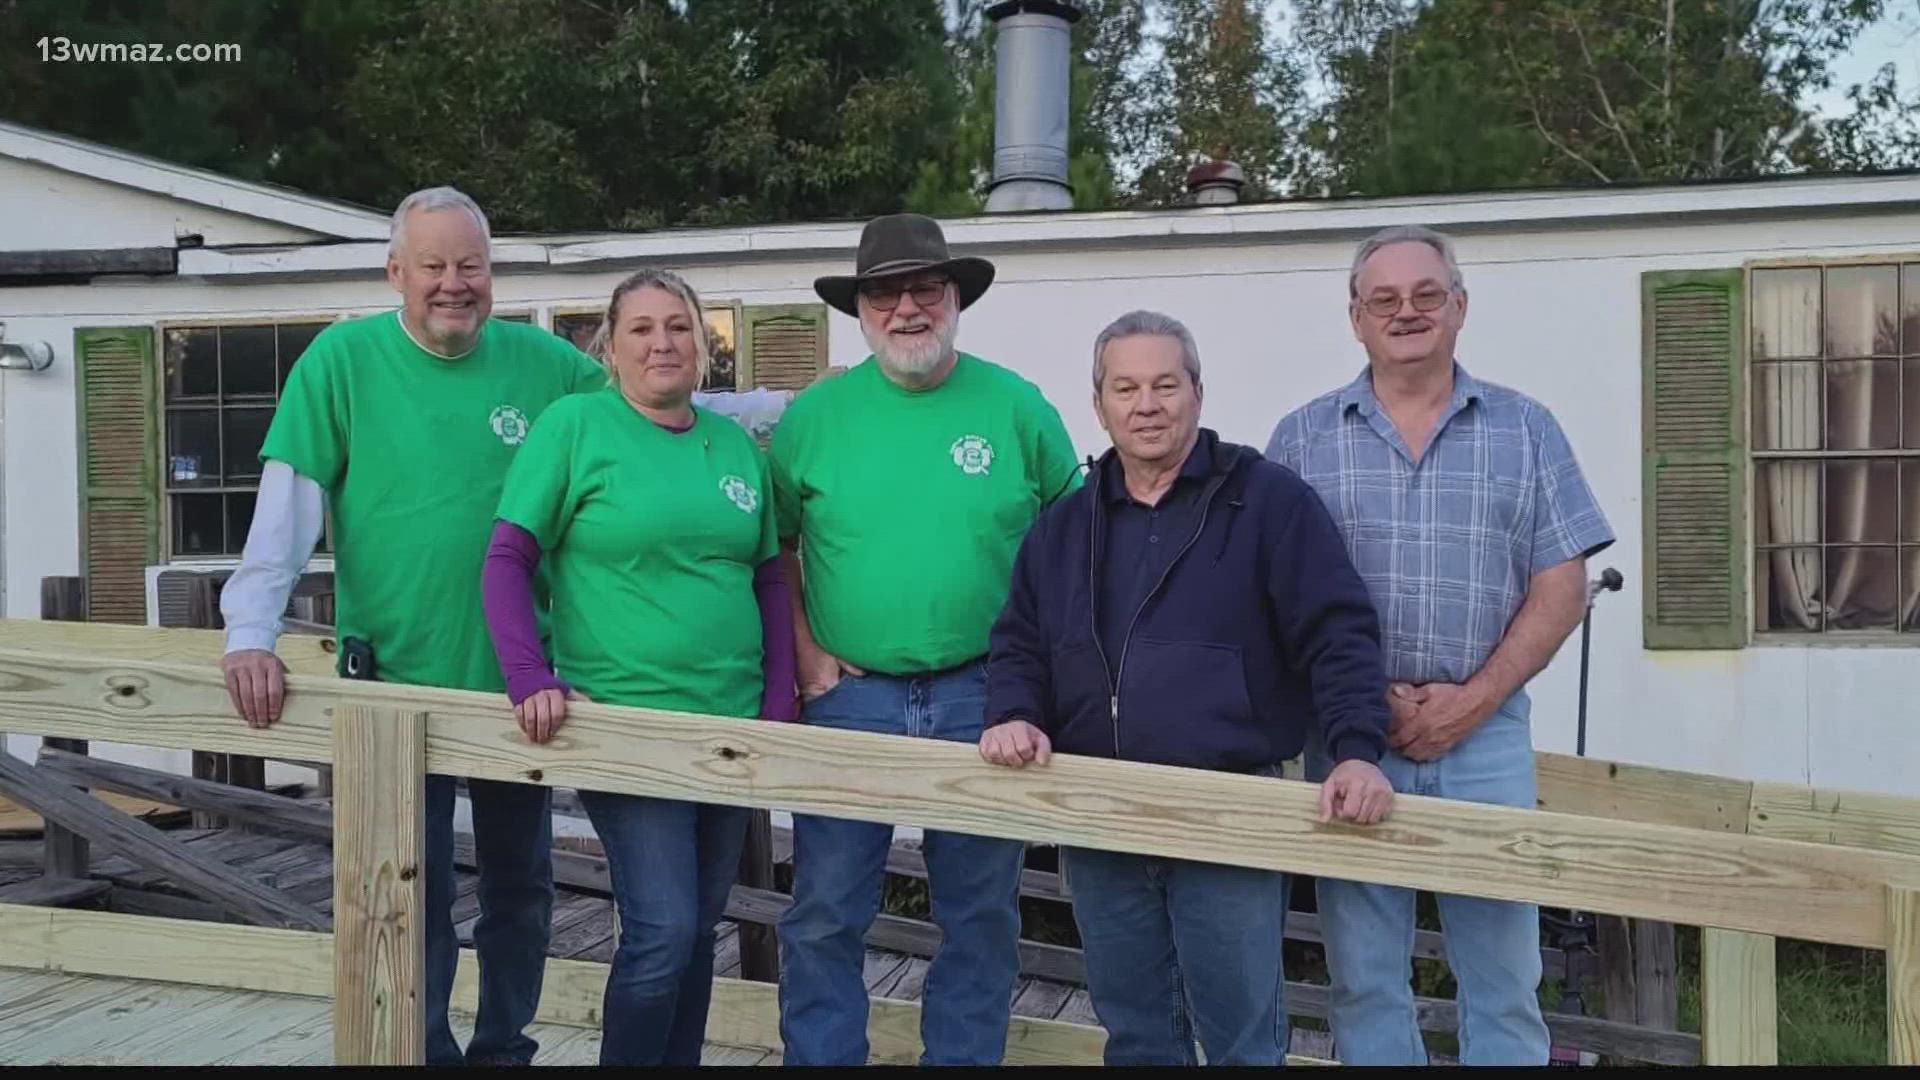 The Dublin Civitan club has worked to help the community for more than 65 years.